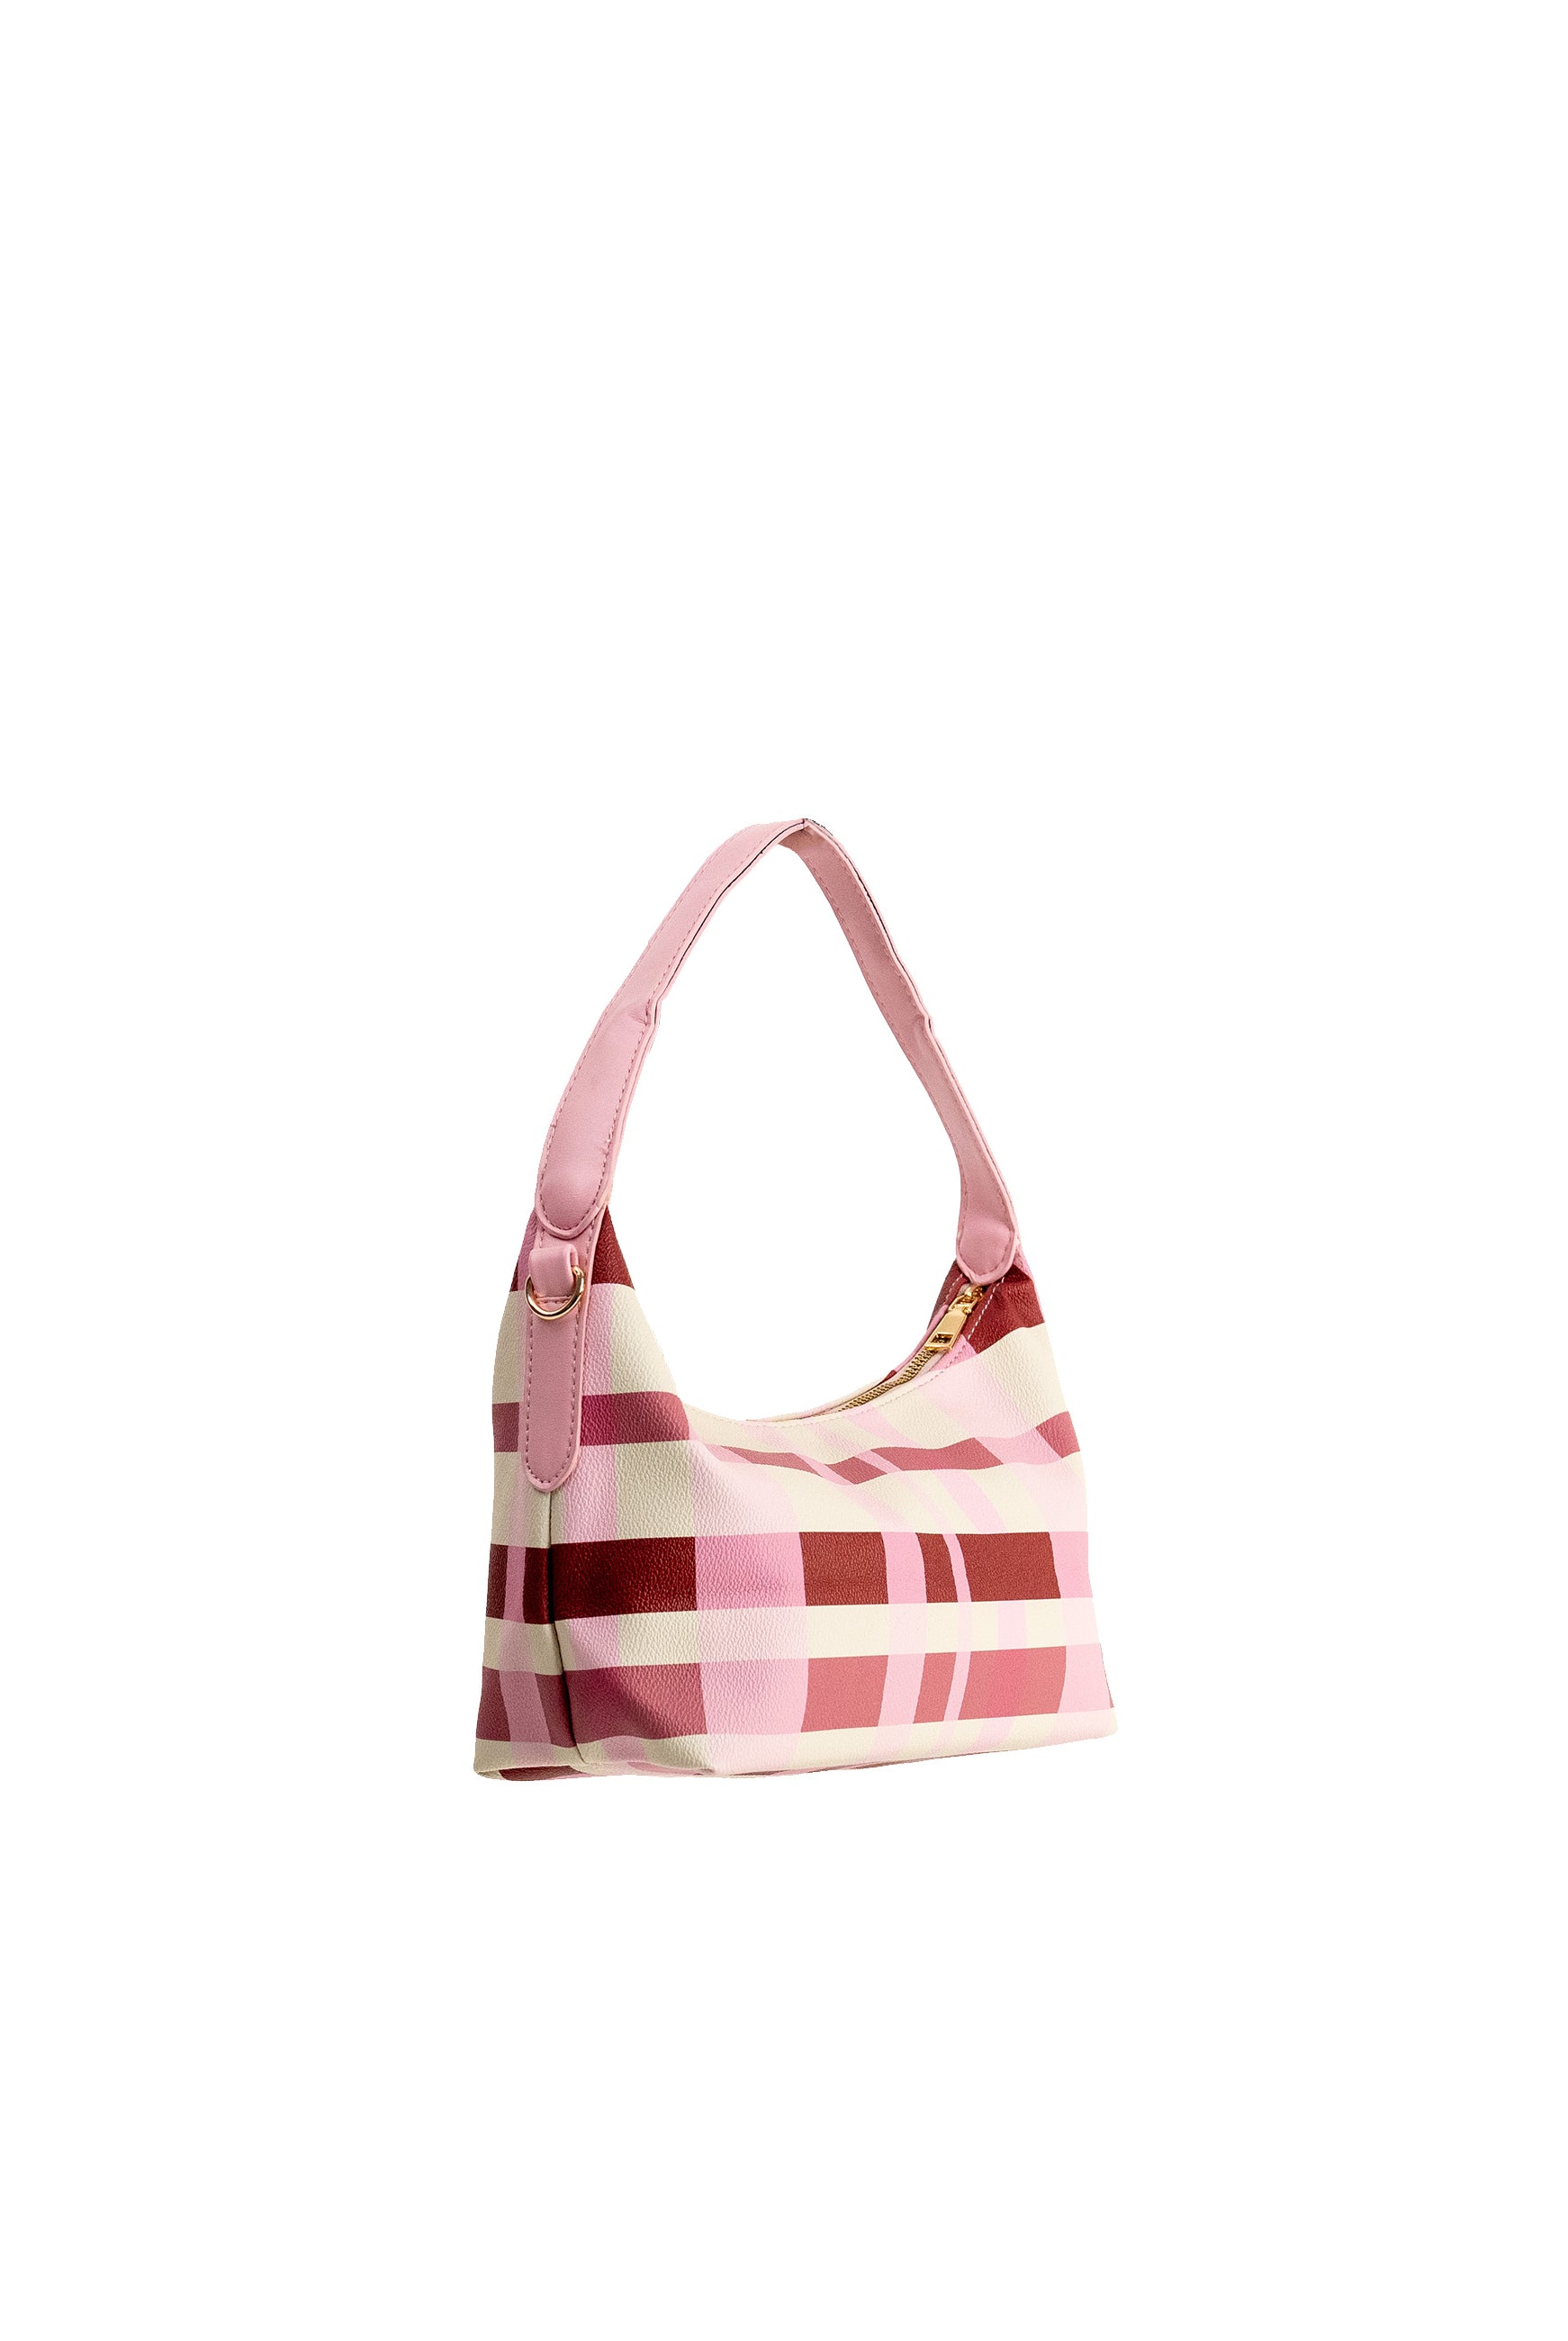 My Accessories London Hobo Check Shoulder Bag in Pink | Womens Accessories | Party Season